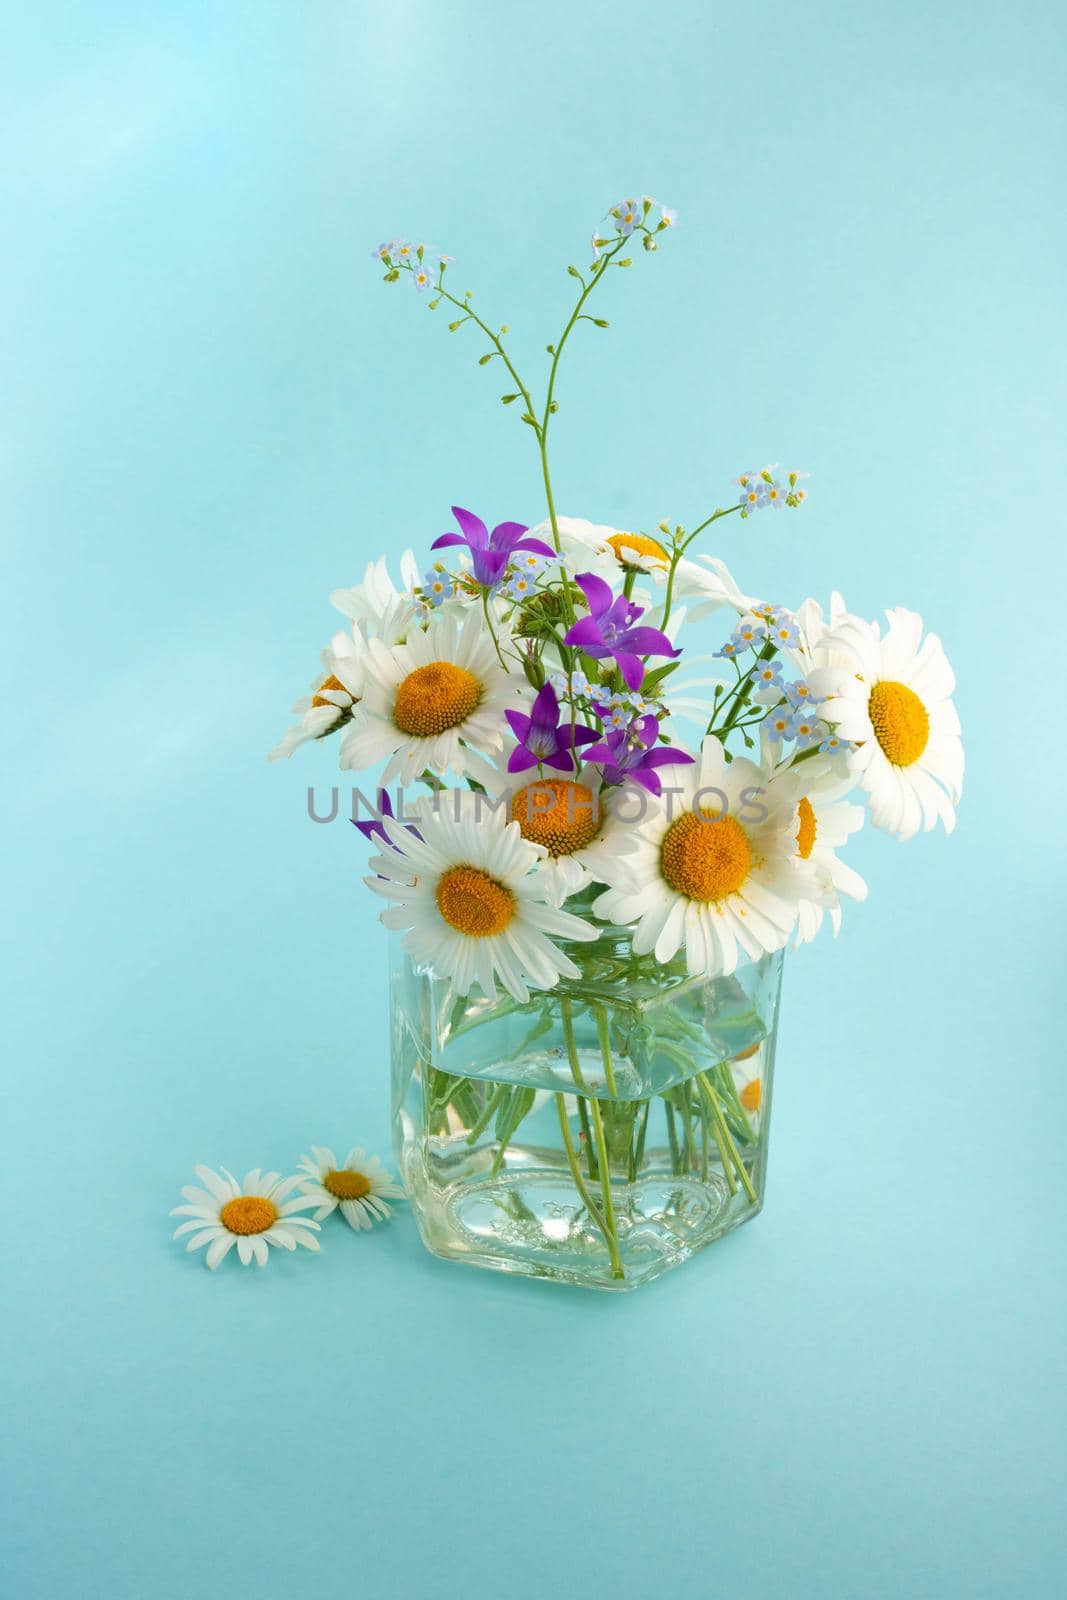 Chamomile, bluebells and forget-me-nots.Bouquet in a glass jar on a blue background.